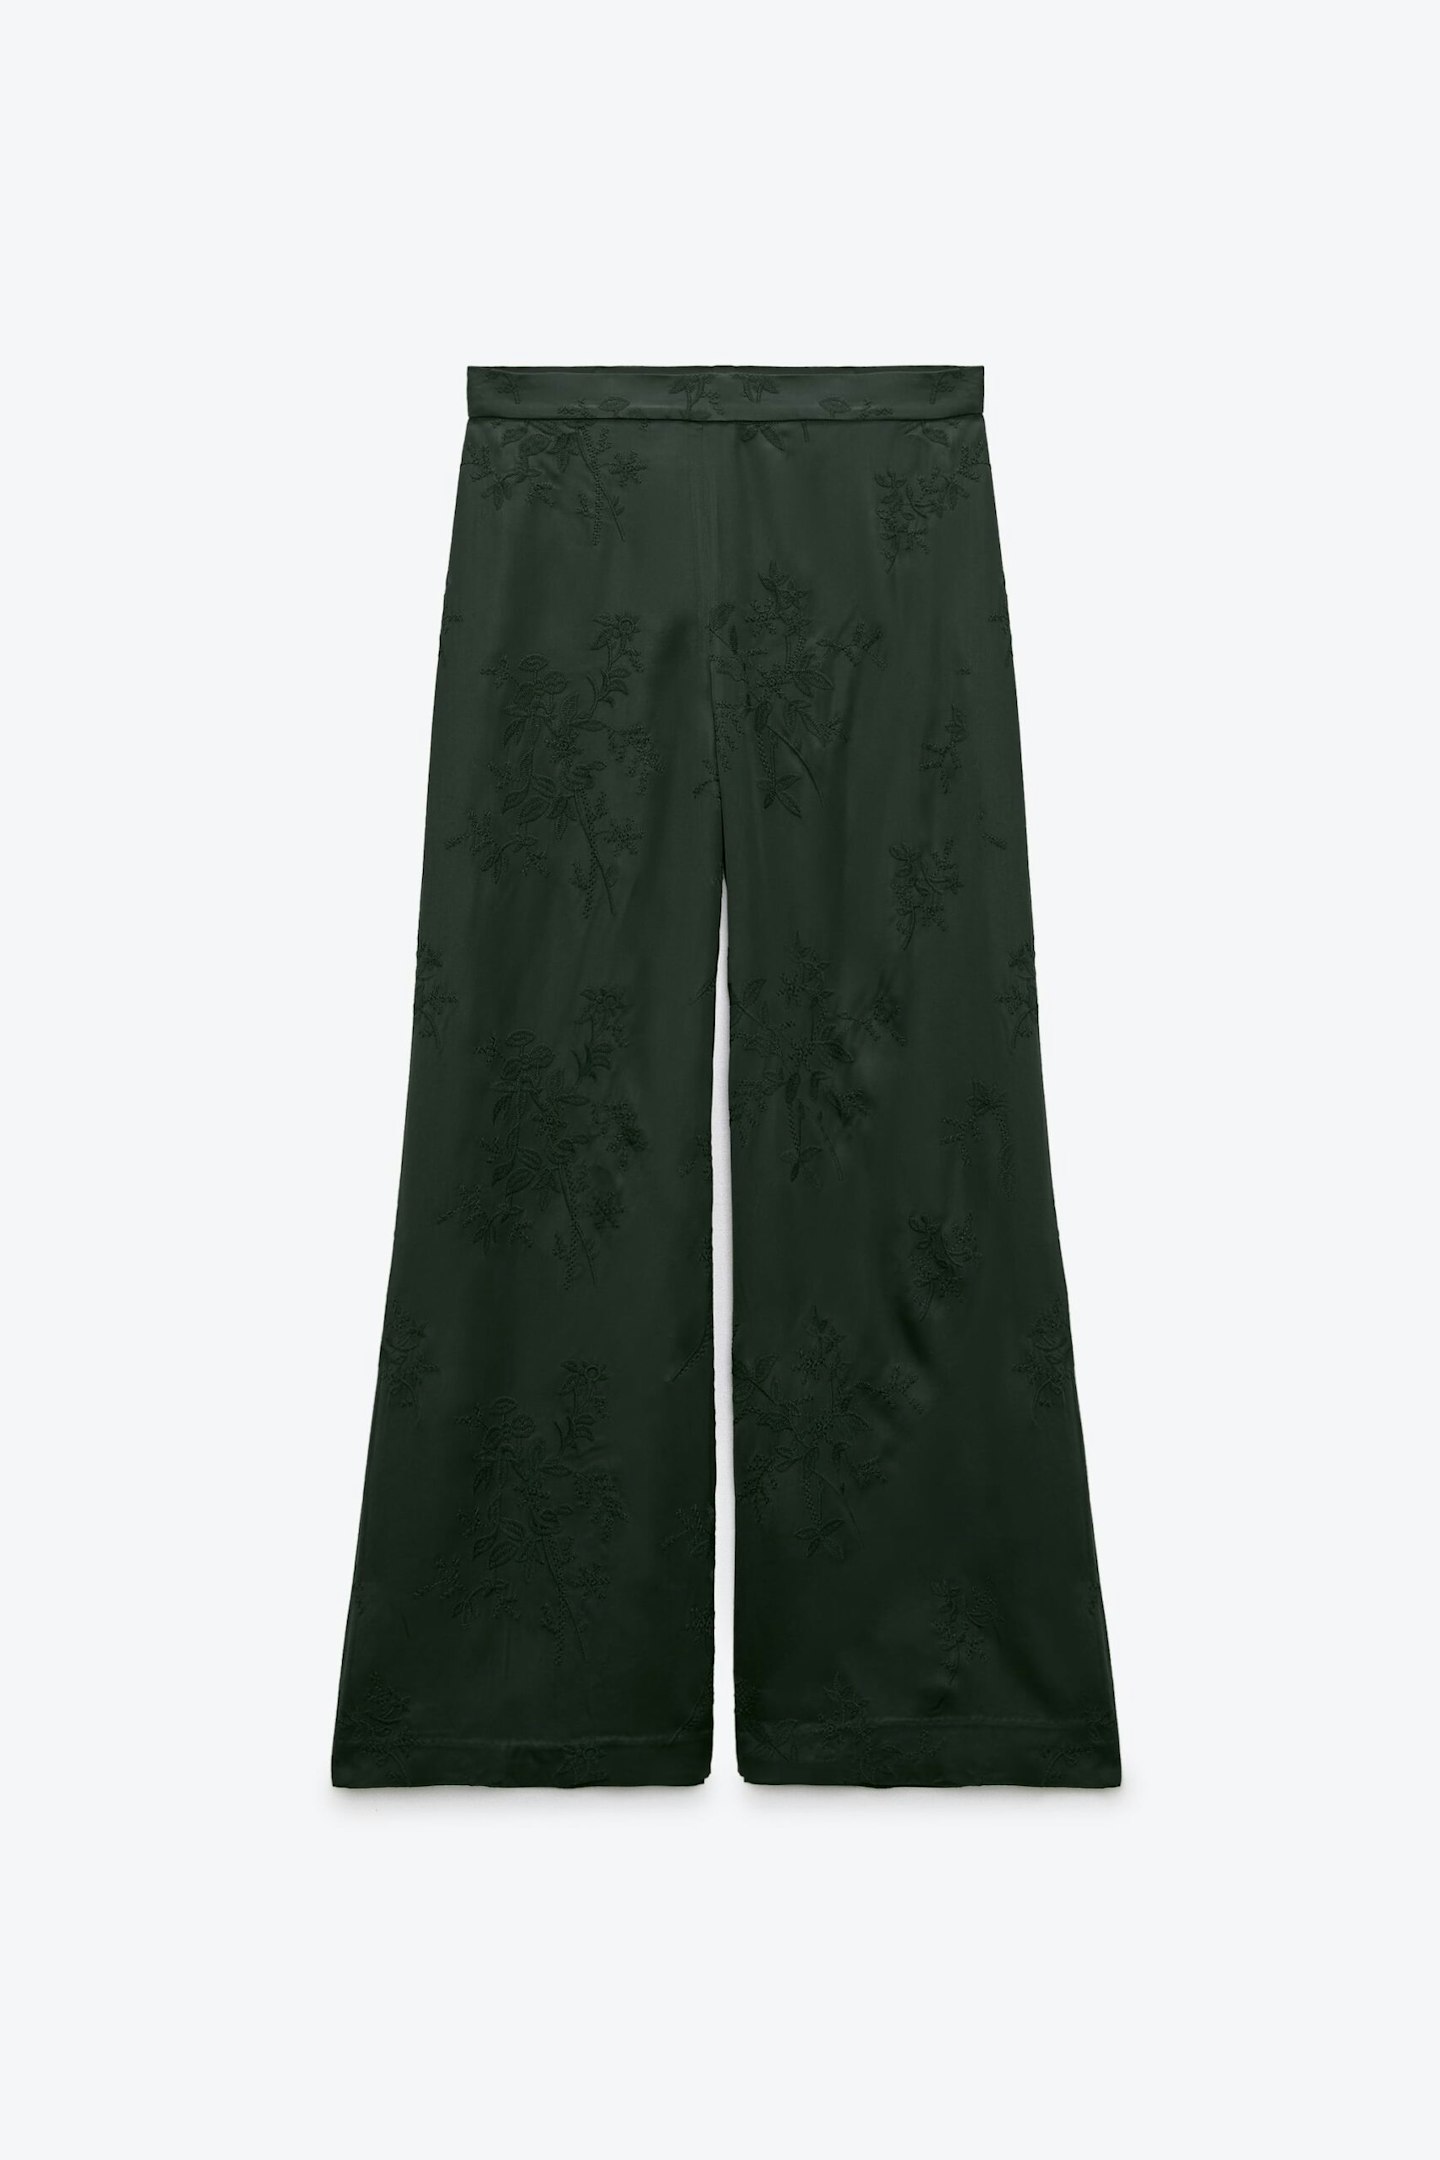 Zara, Embroidered Satin Trousers